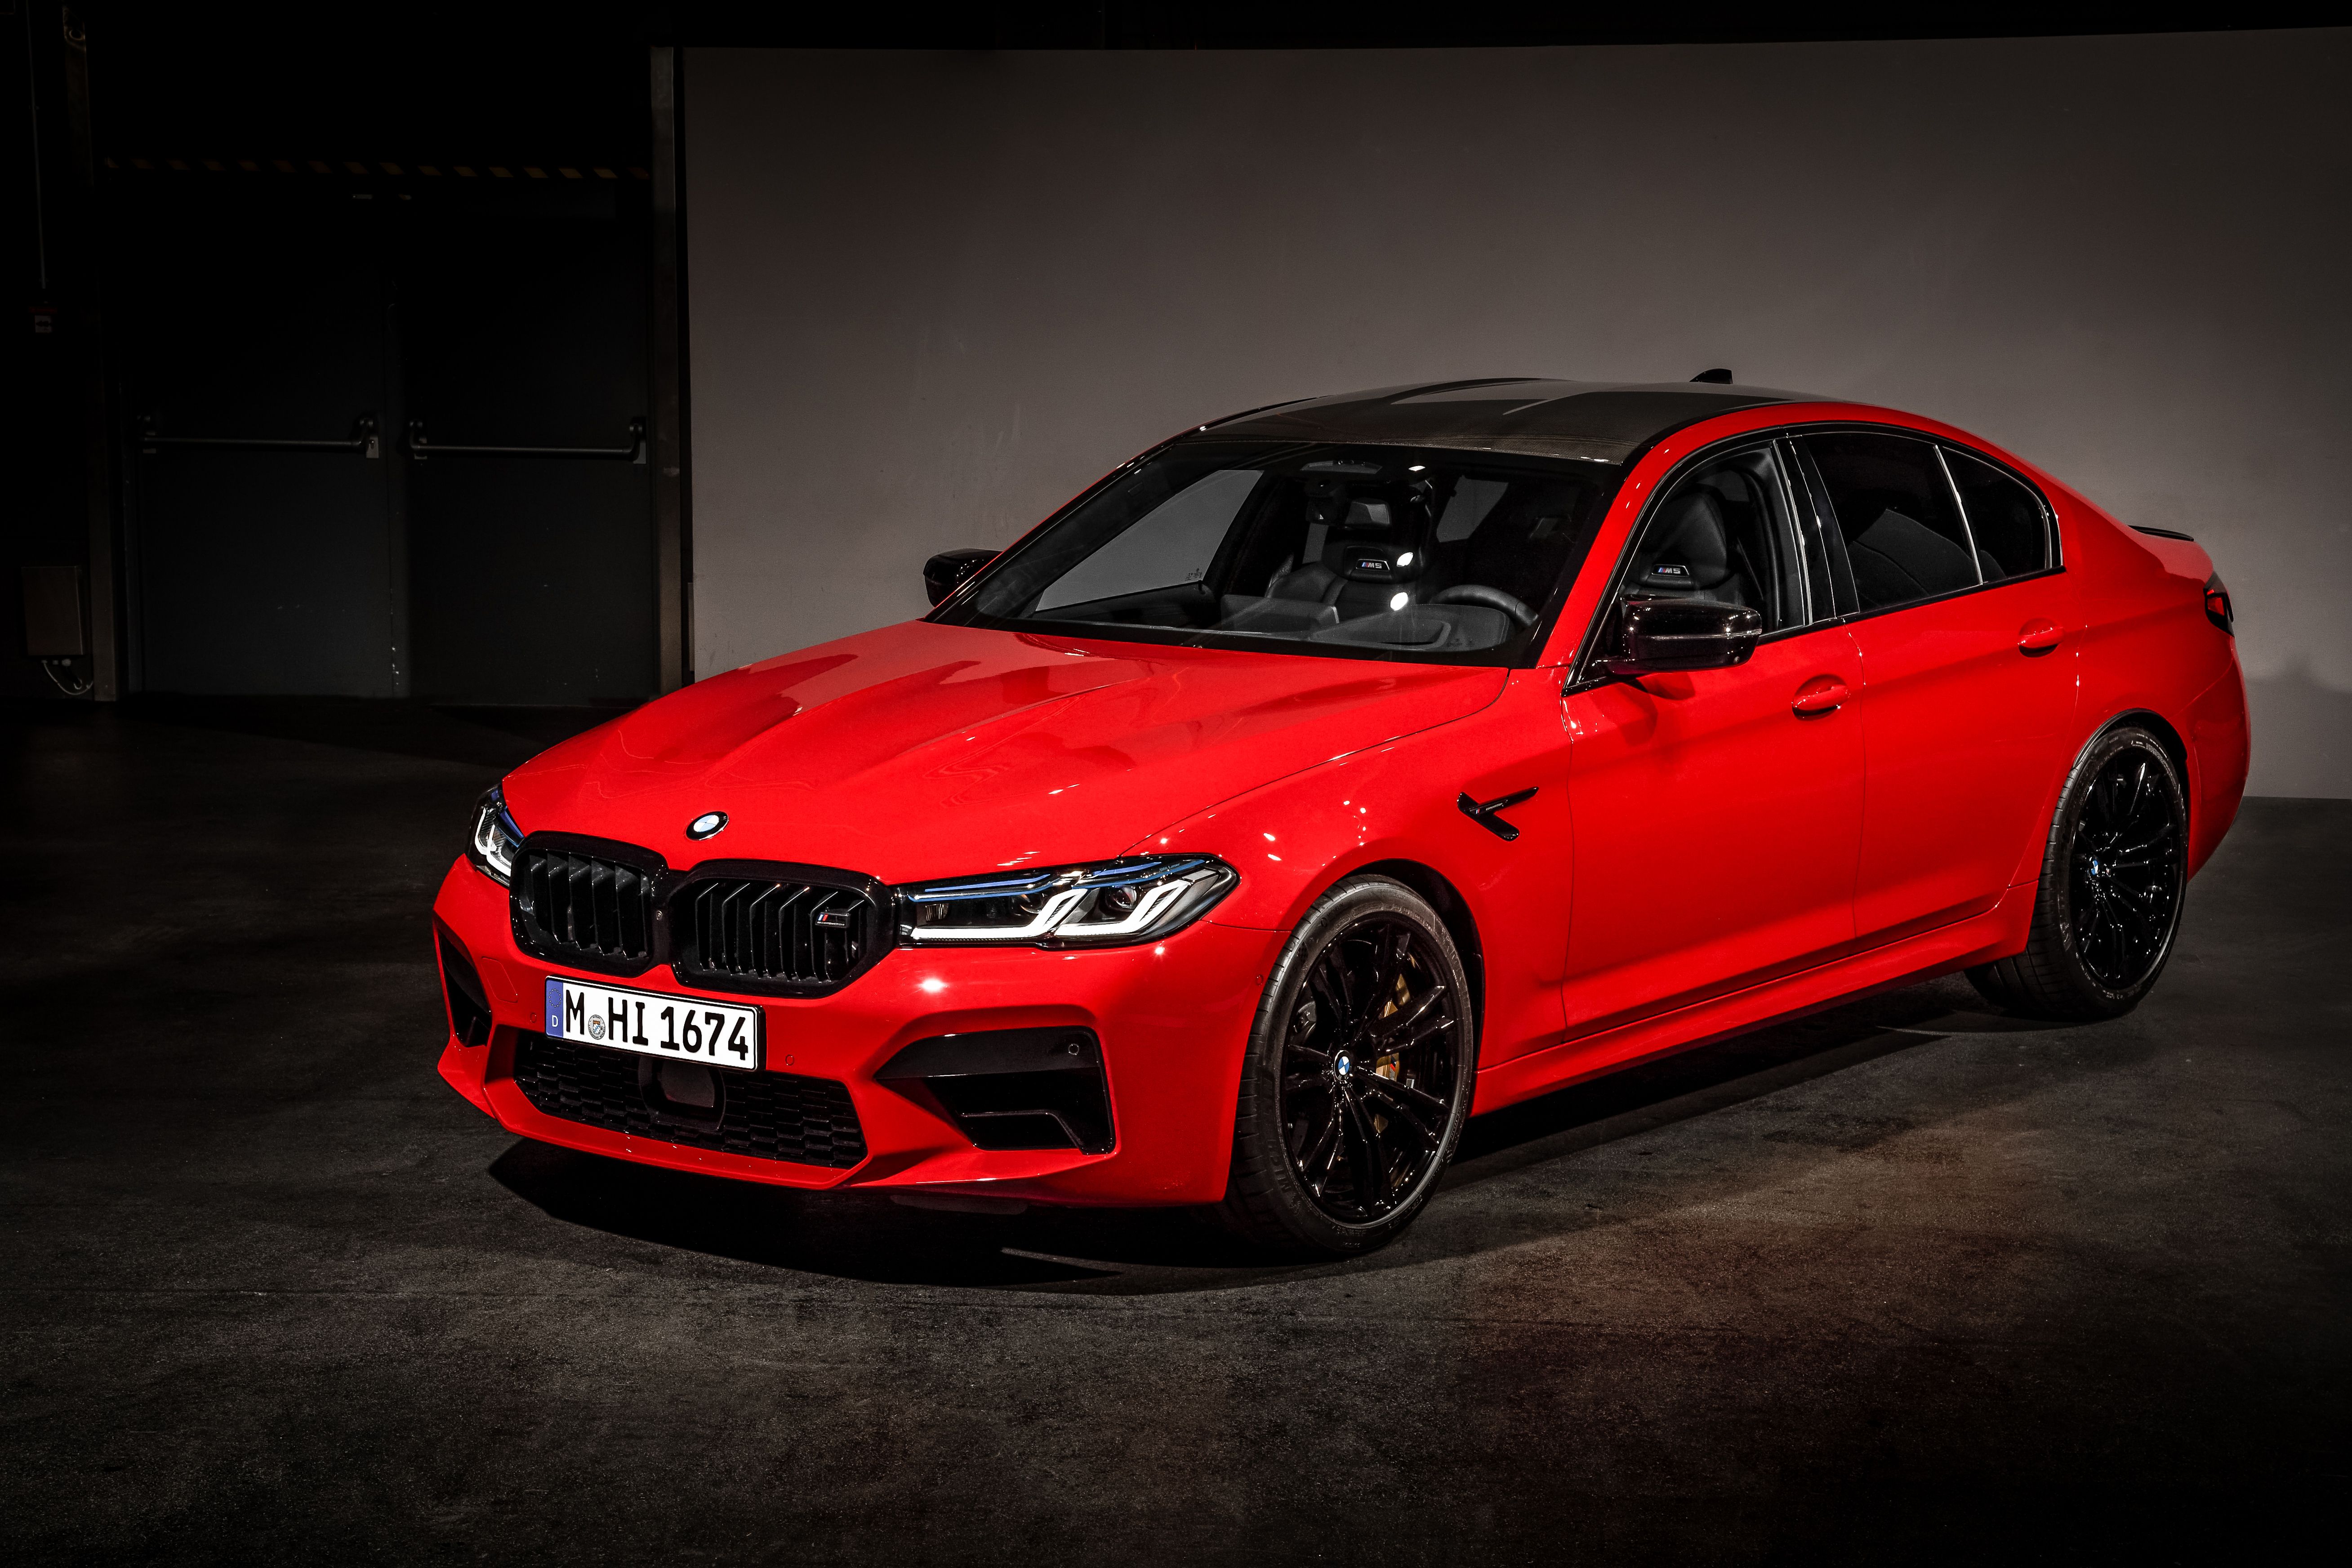 BMW M5 CS in show-stopping red